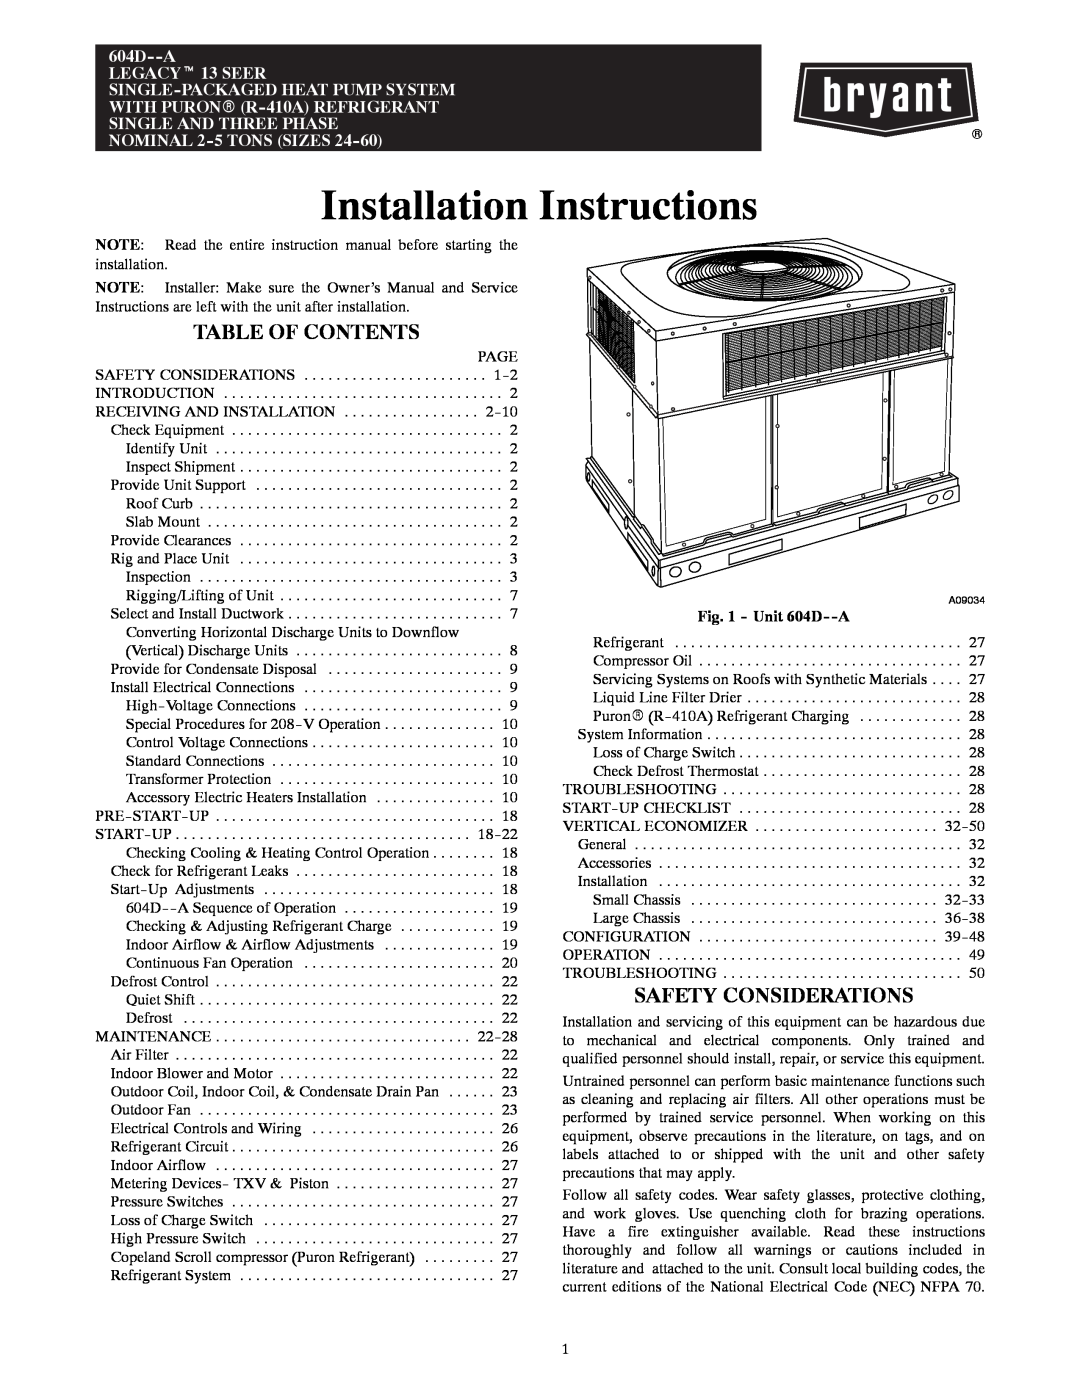 Bryant installation instructions Table Of Contents, Safety Considerations, Unit 604D--A, Installation Instructions 